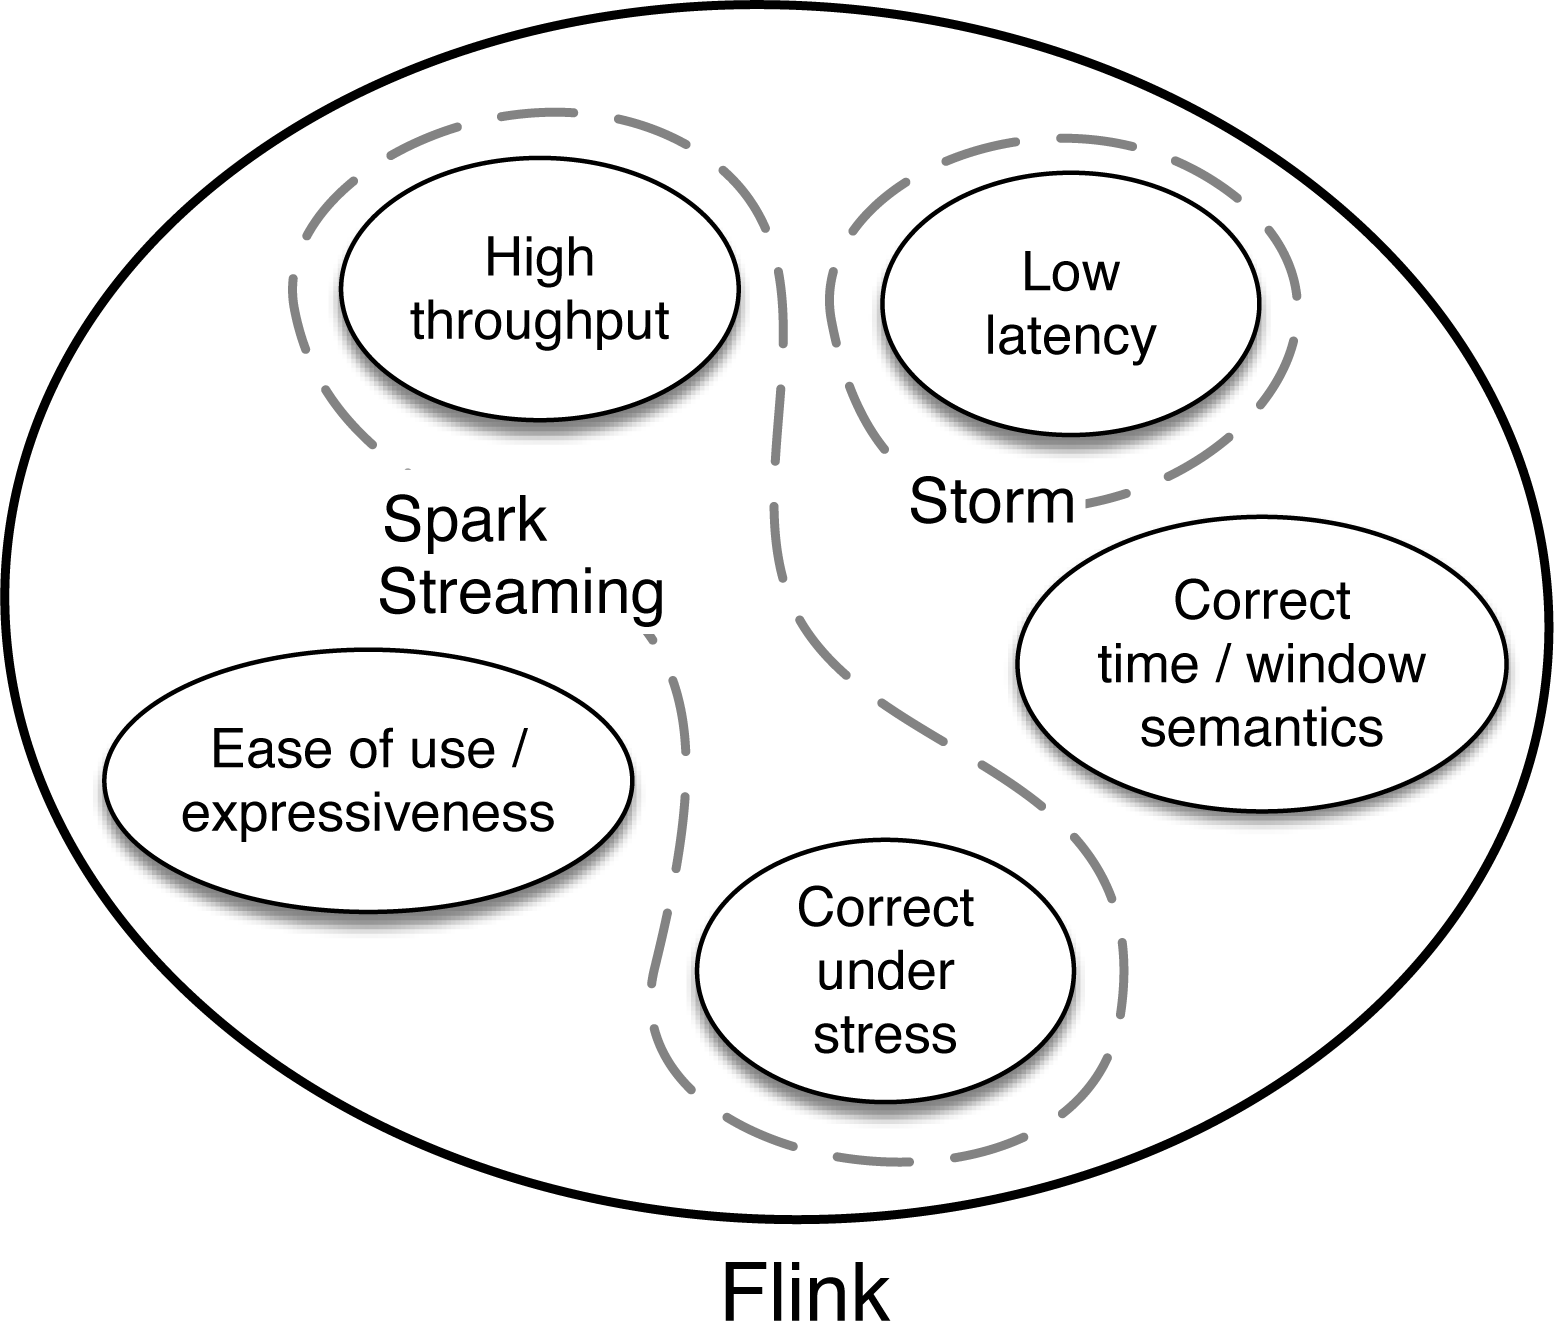 One of the strengths of Apache Flink is the way it combines many desirable capabilities that have previously required a tradeoff in other projects. Apache Storm, in contrast, provides low latency, but at present does not provide high throughput and does not support correct handling of state when failures happen. The micro-batching approach of Apache Spark Streaming achieves fault tolerance with high throughput but at the cost of very low latency/real-time processing, inability to fit windows to naturally occurring sessions, and some challenges with expressiveness.